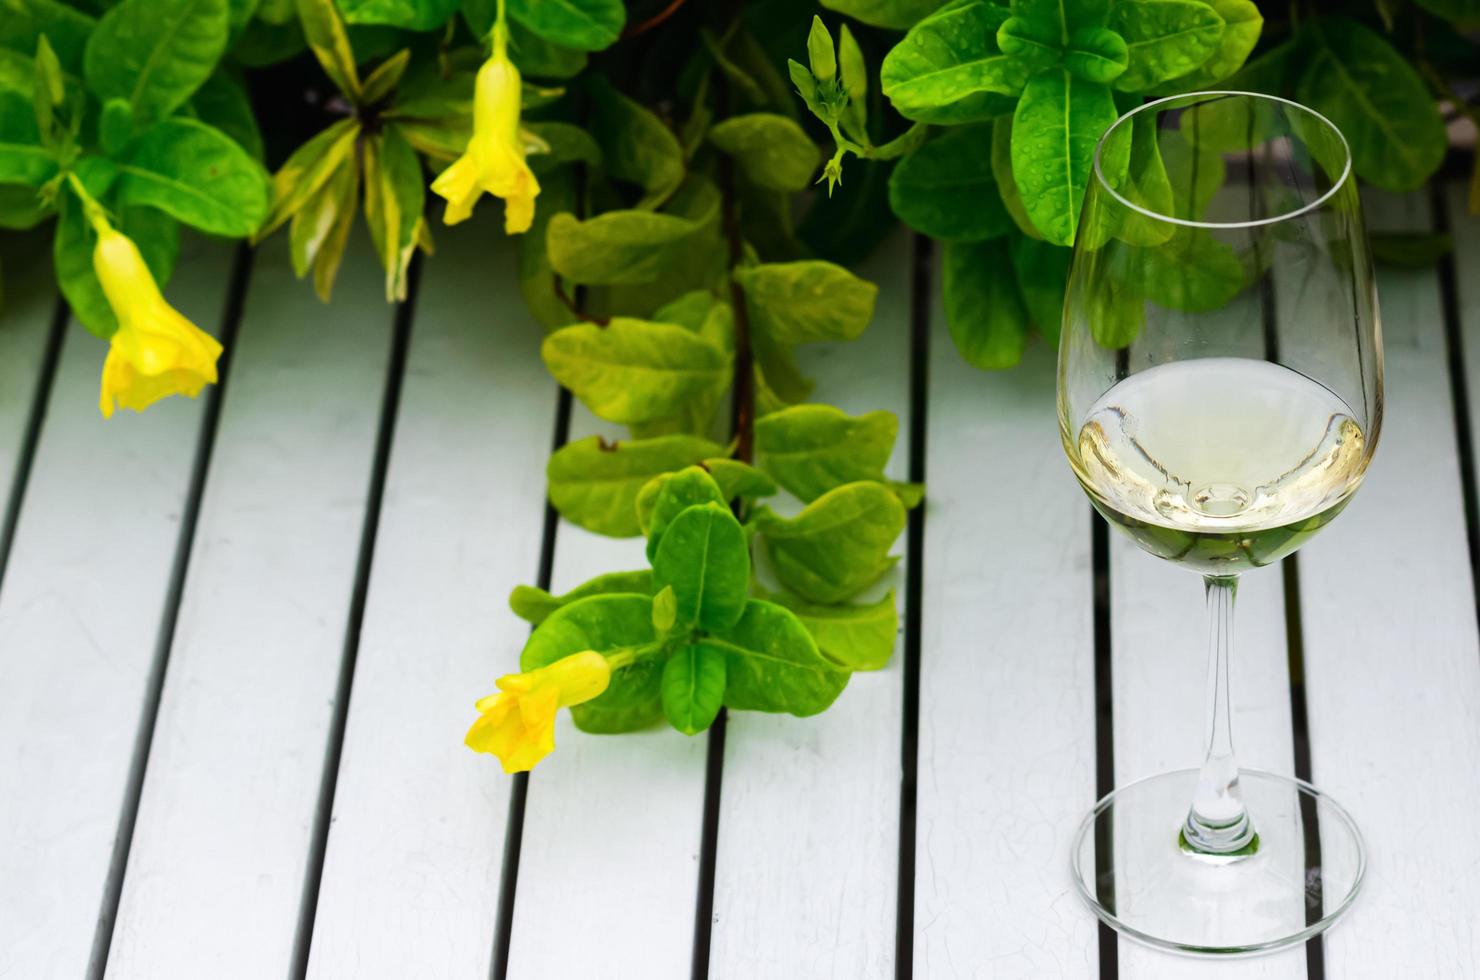 A glass of white wine on white table with green leaves. photo